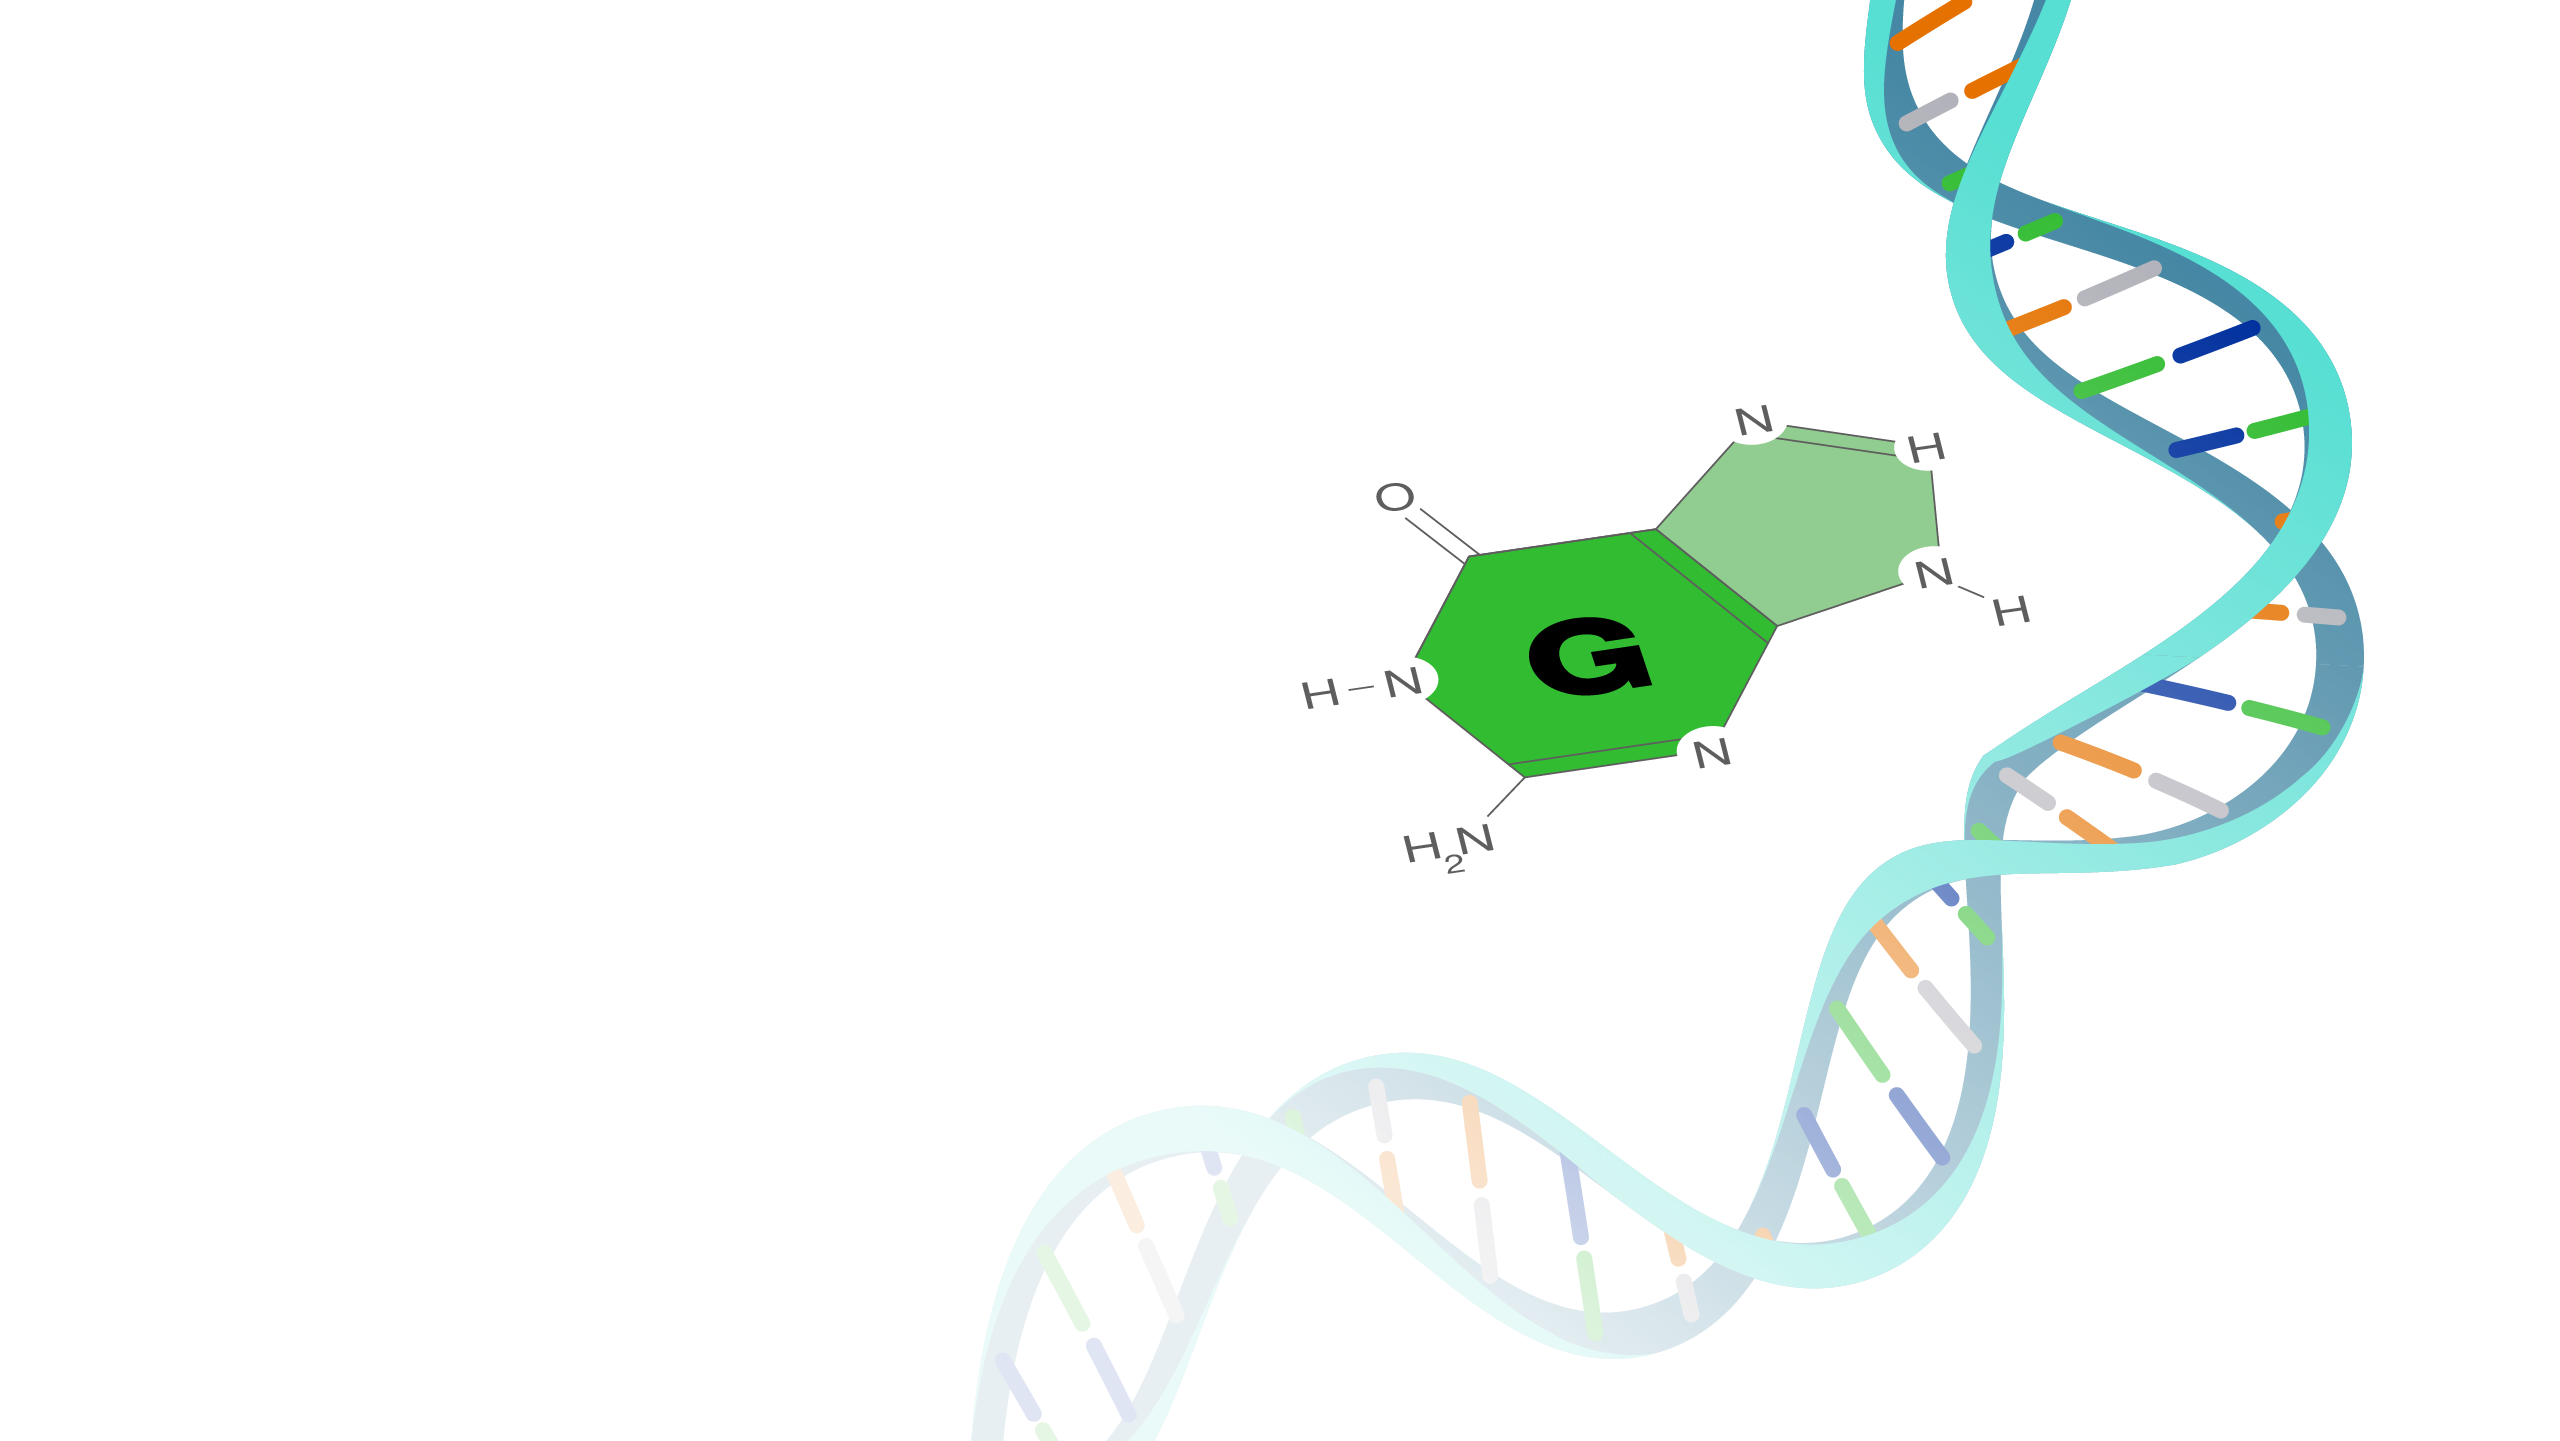 guanine dna